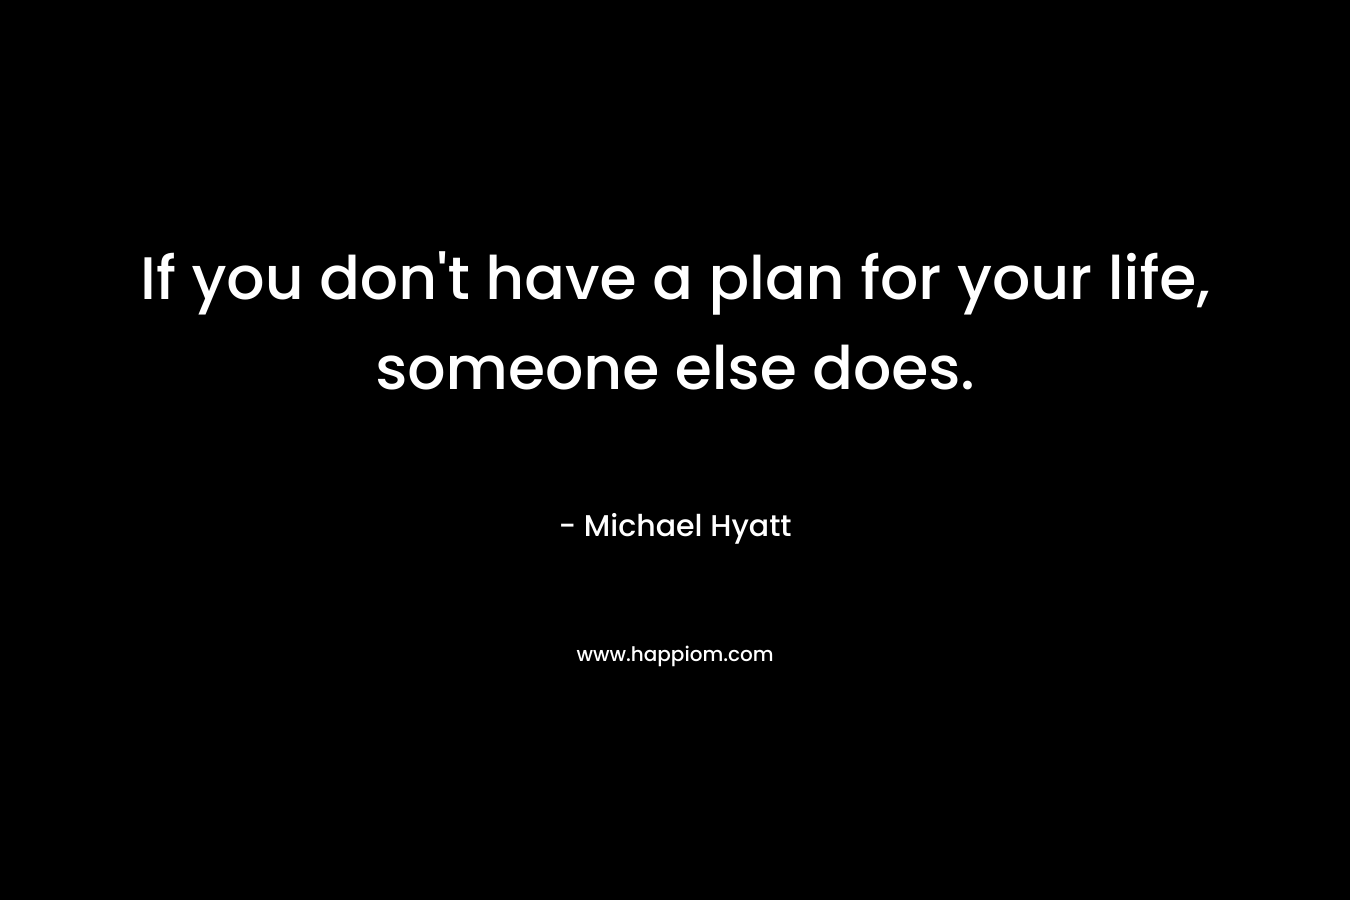 If you don't have a plan for your life, someone else does.